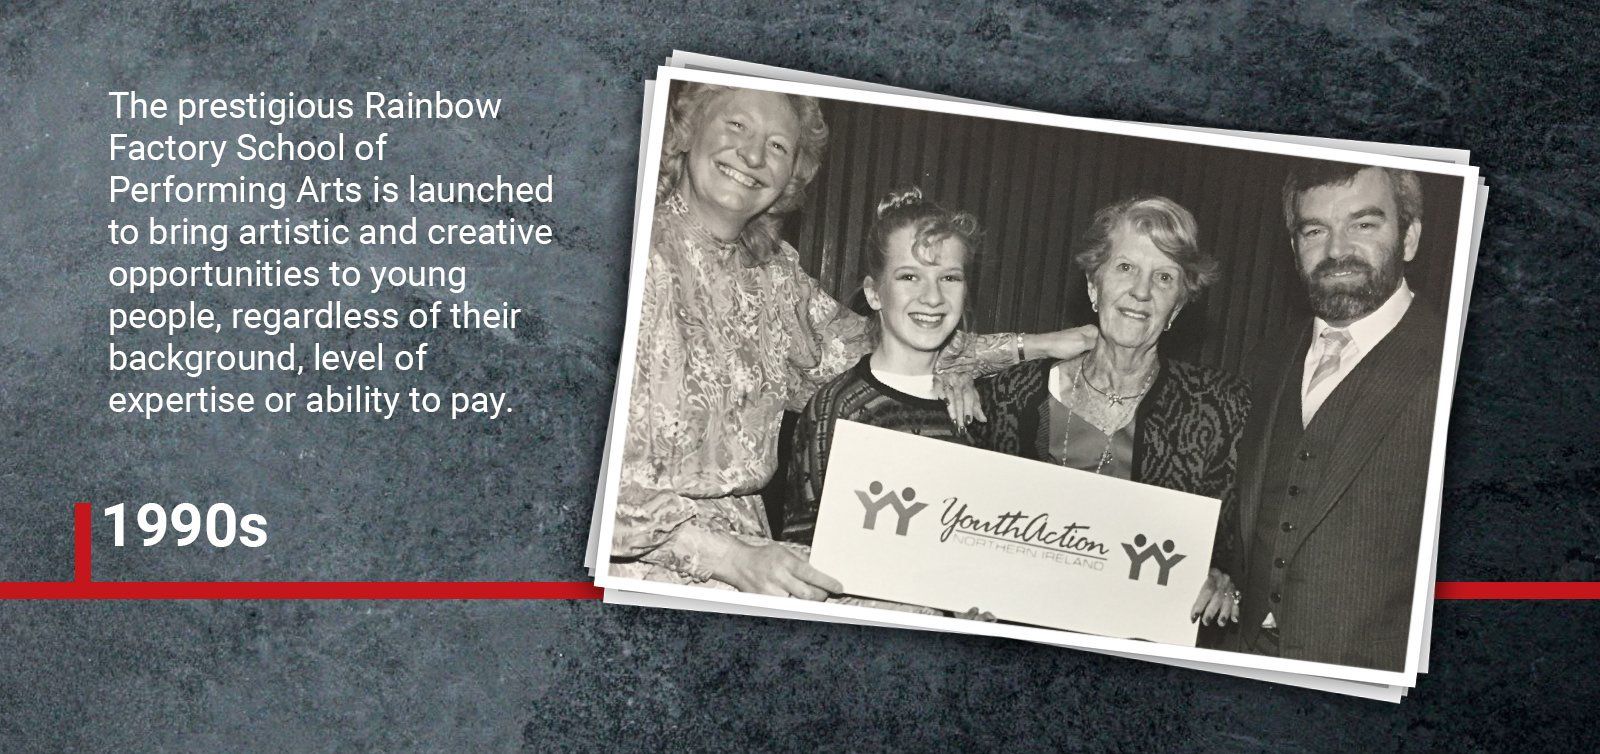 1990s The prestigious Rainbow Factory School of Performing Arts is launched to bring artistic and creative opportunities to young people, regardless of their background, level of expertise or ability to pay.